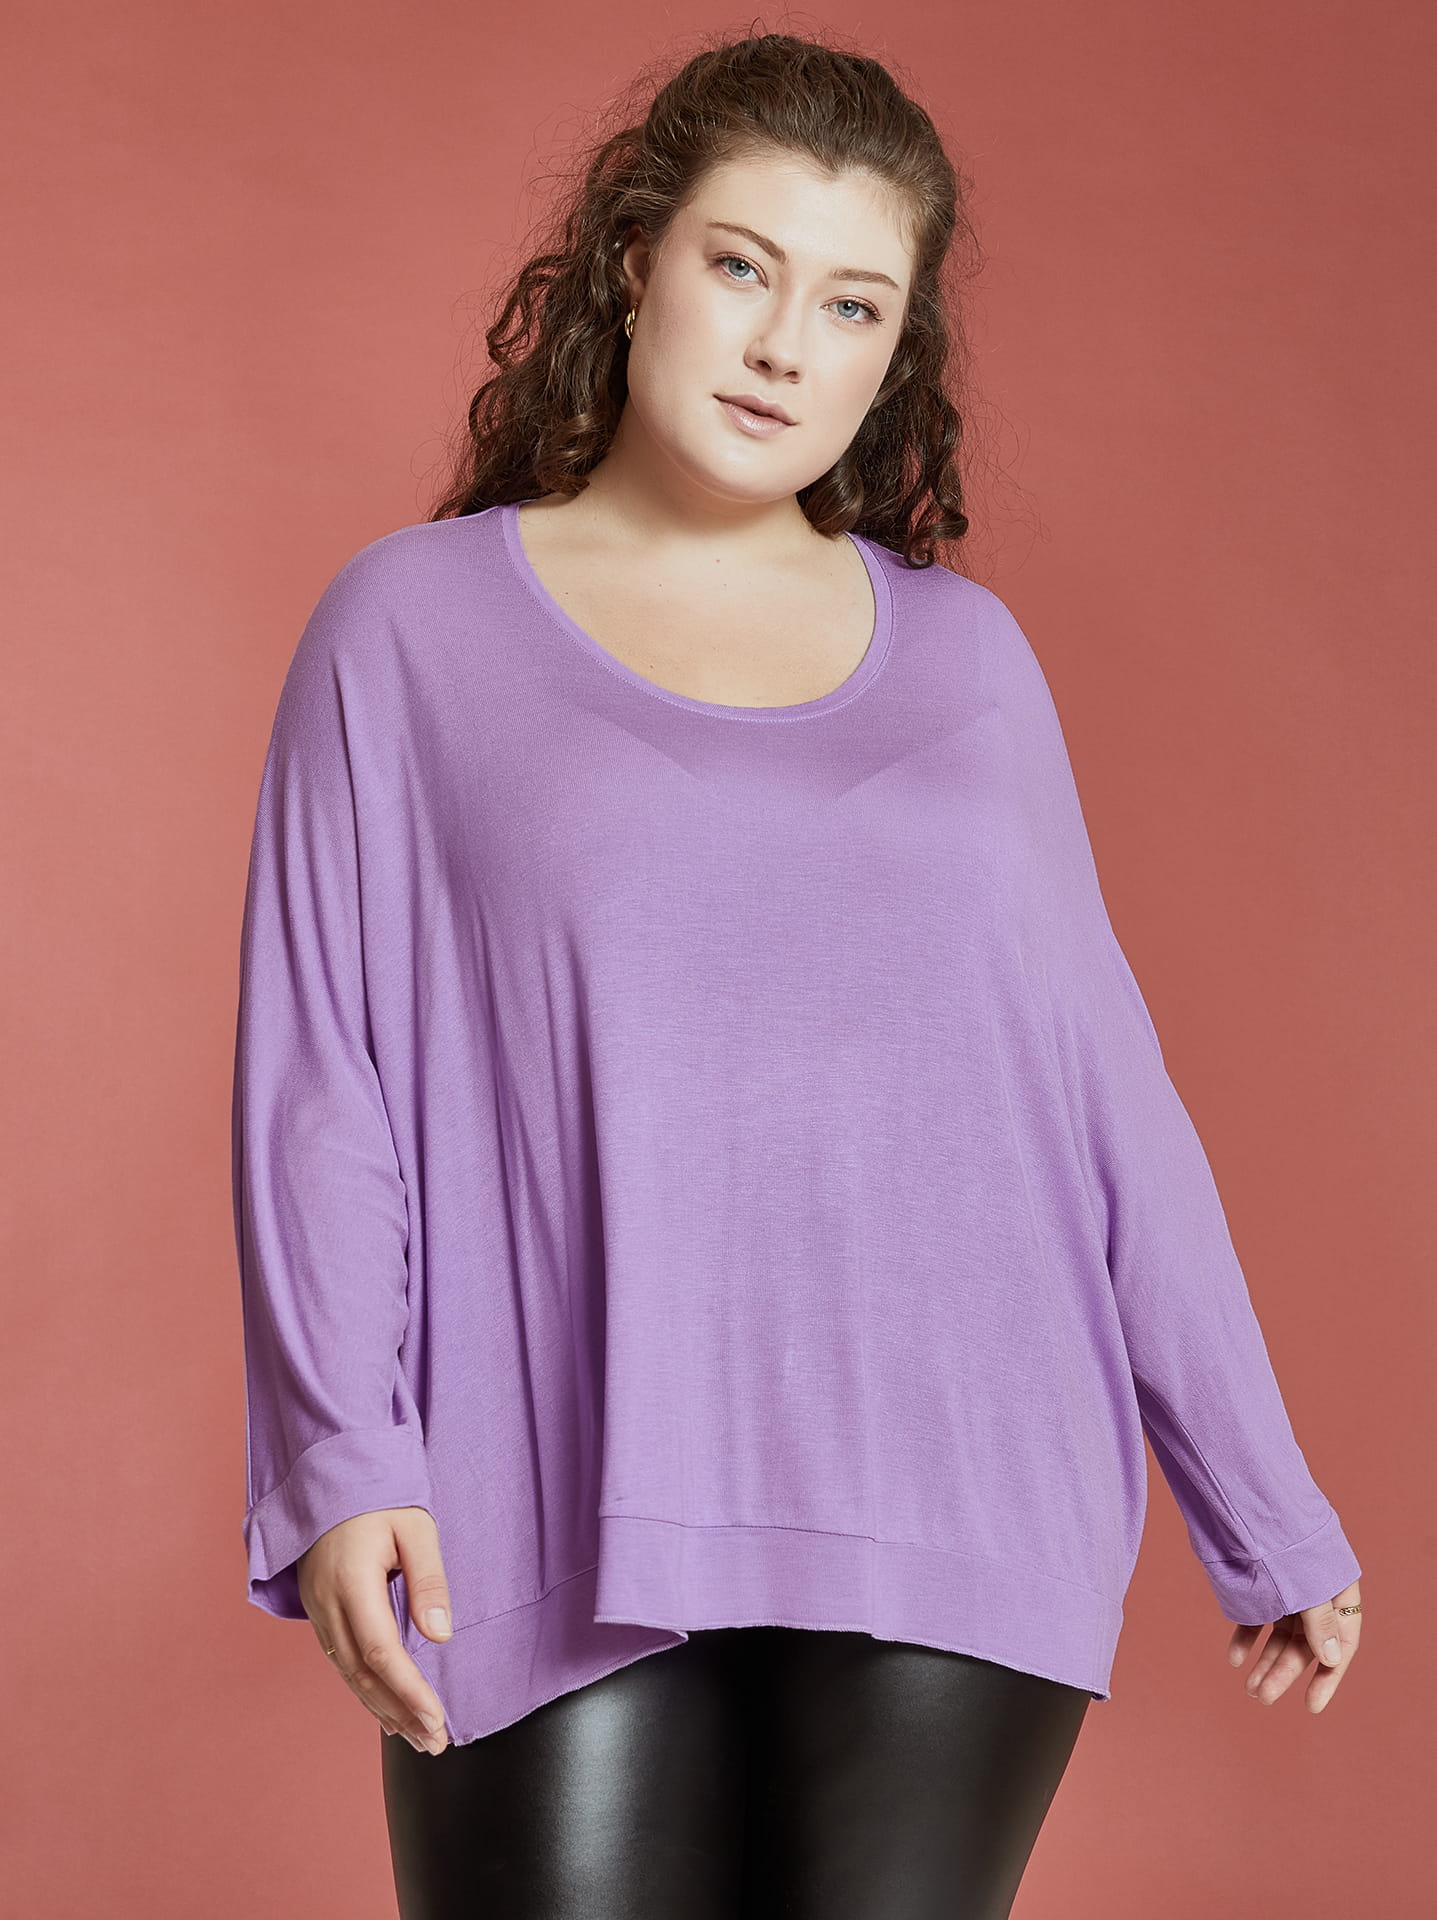 ASOS DESIGN oversized viscose shirt with half sleeve in lilac, ASOS